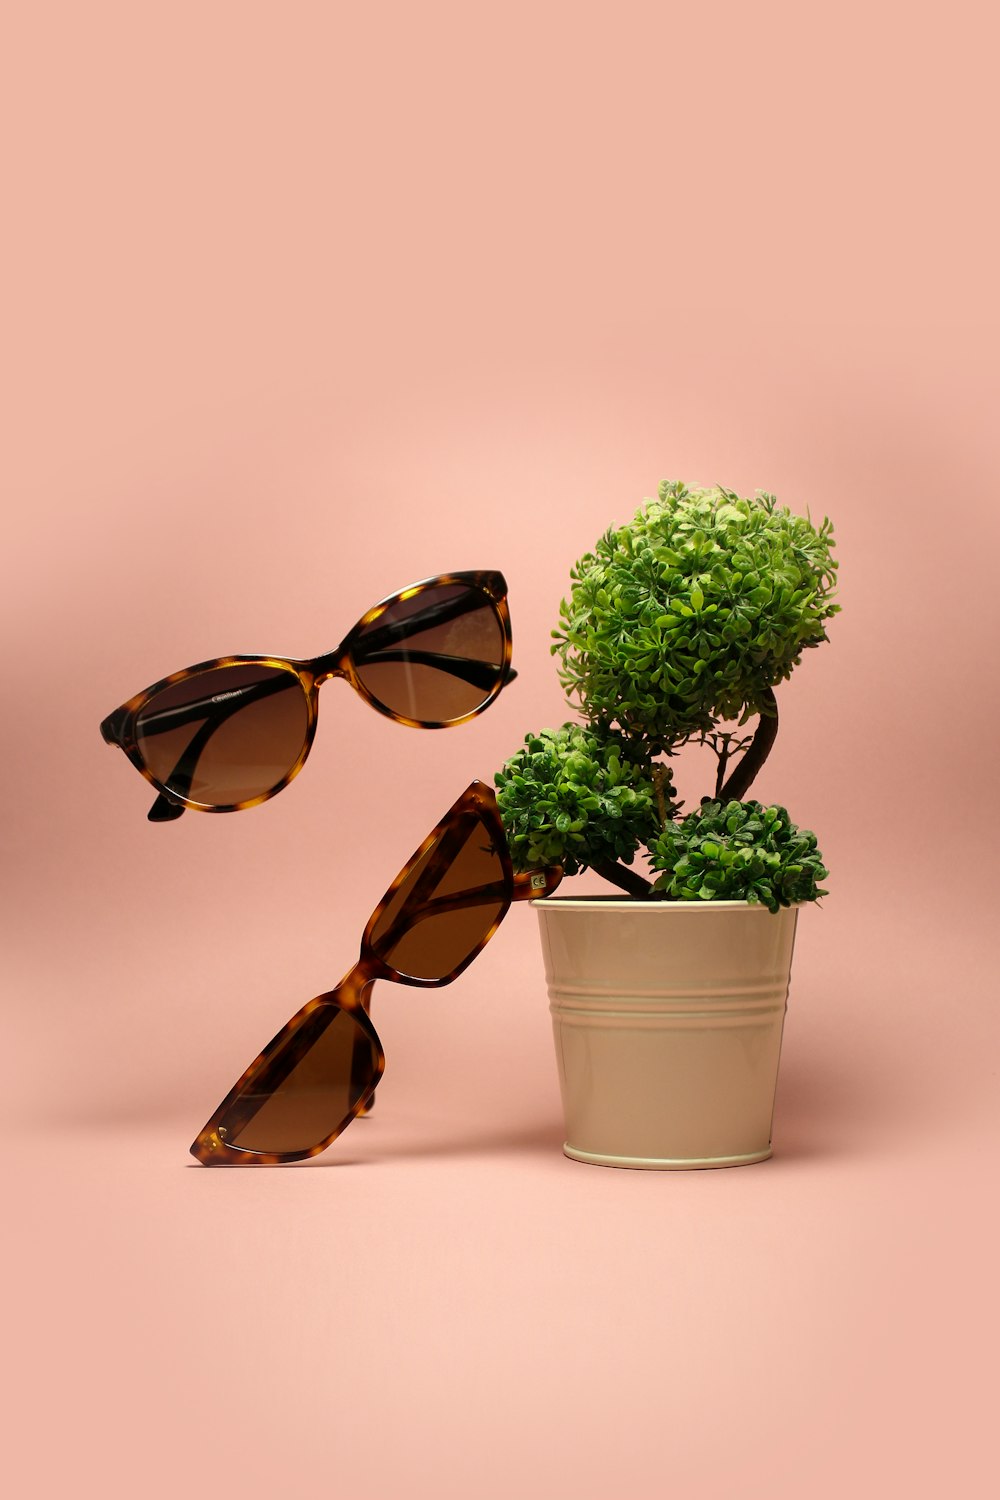 two brown sunglasses beside green-leafed plant